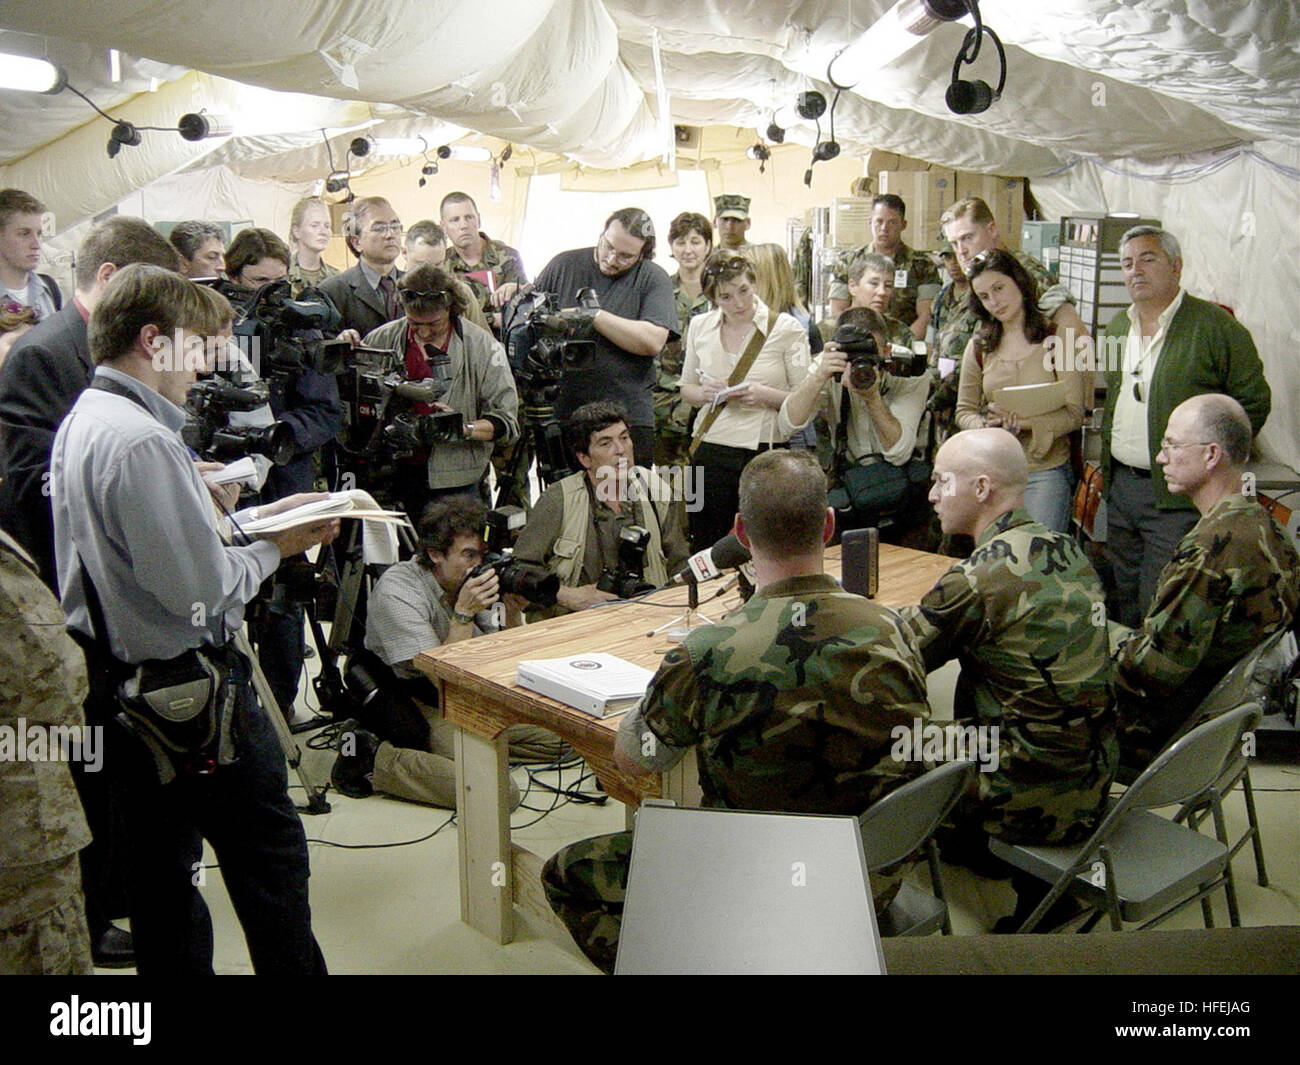 030407-N-7438S-002 Naval Station Rota, Spain (Apr. 7, 2003) -- Marine Chief Warrant Officer Chris Campbell assigned to the 2nd Battalion, 8th Marines (middle seated) addresses a pool of international media at Fleet Hospital Eight. Campbell was wounded in the arm by shrapnel during a battle at Nasiriyah, Iraq on March 26, and was sent to Rota, Spain for follow-up treatment. Campbell was award the Purple Heart for his injury in battle.  U.S. Navy photo by Chief Journalist Dan Smithyman.  (RELEASED) US Navy 030407-N-7438S-002 Marine Chief Warrant Officer Chris Campbell assigned to the 2nd Battali Stock Photo